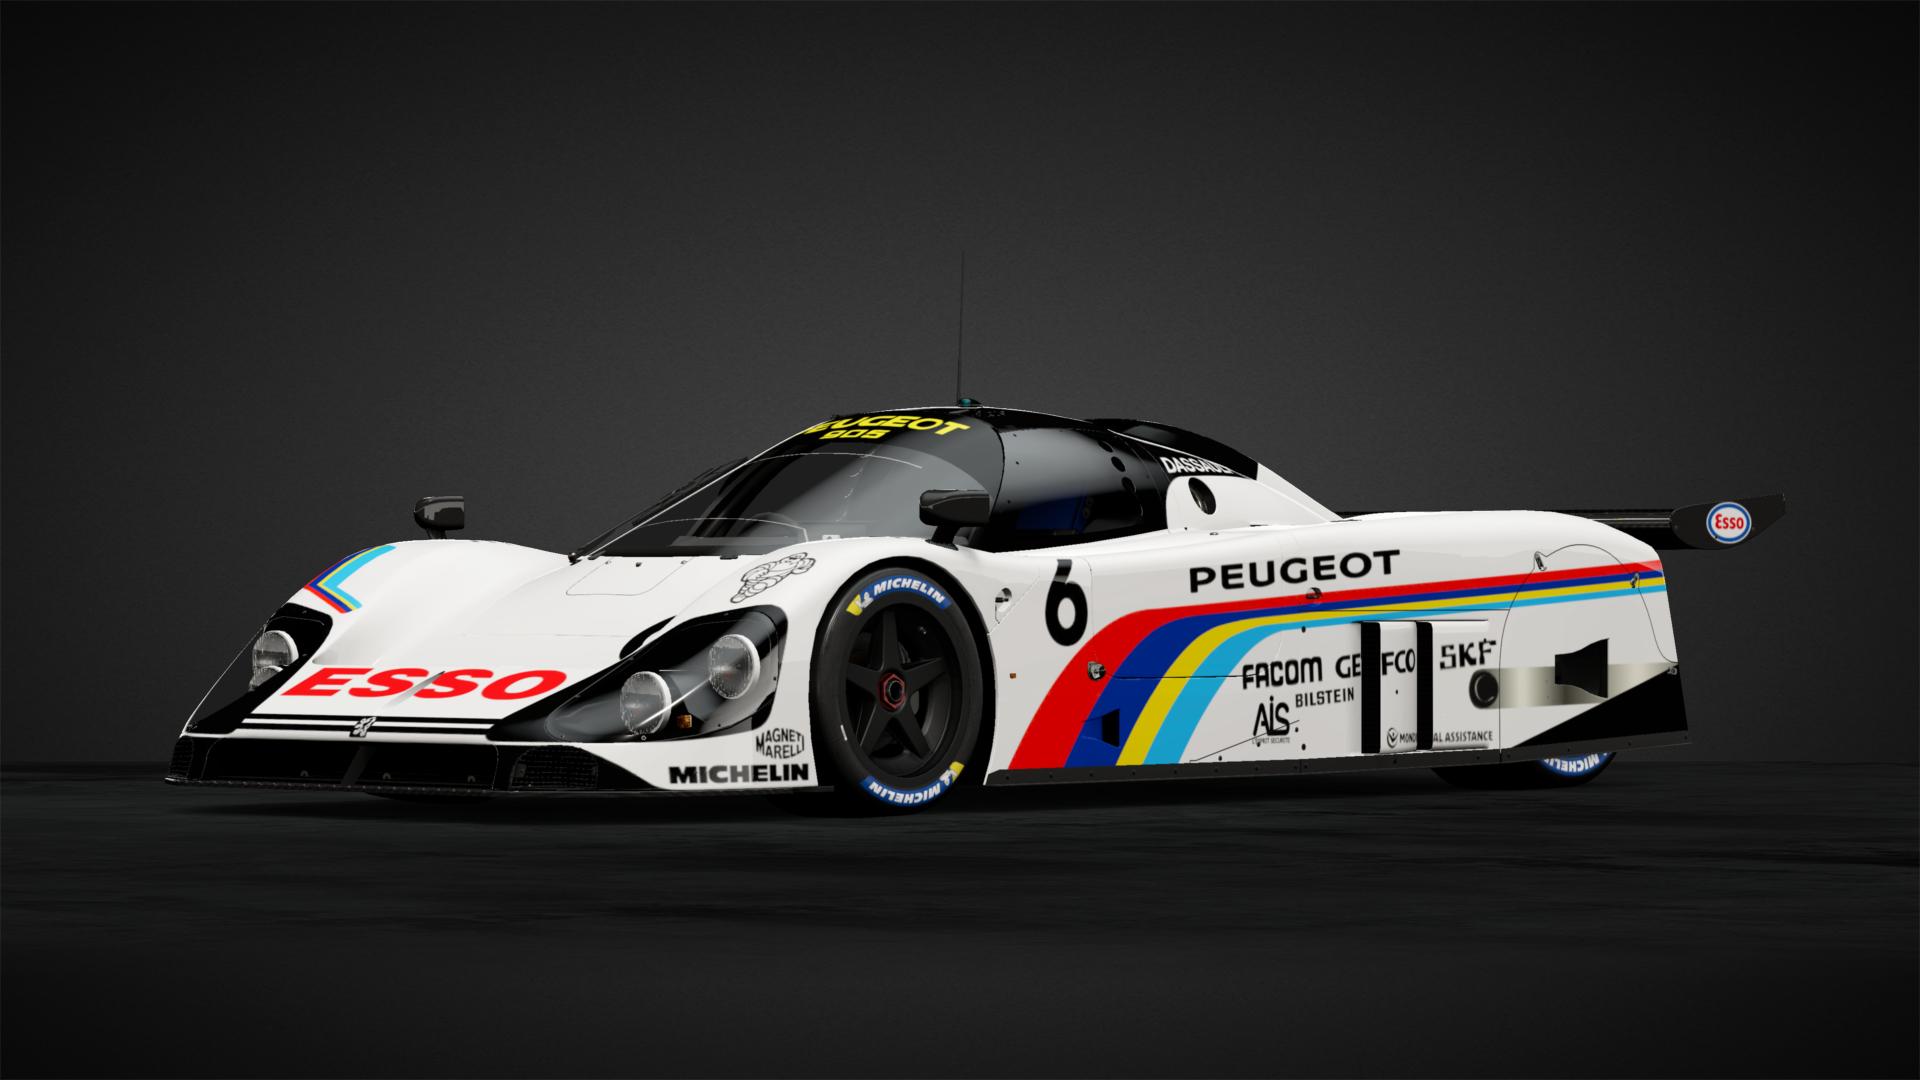 PEUGEOT 905 '91 Livery By RothmansNS 1. Community. Gran Turismo Sport